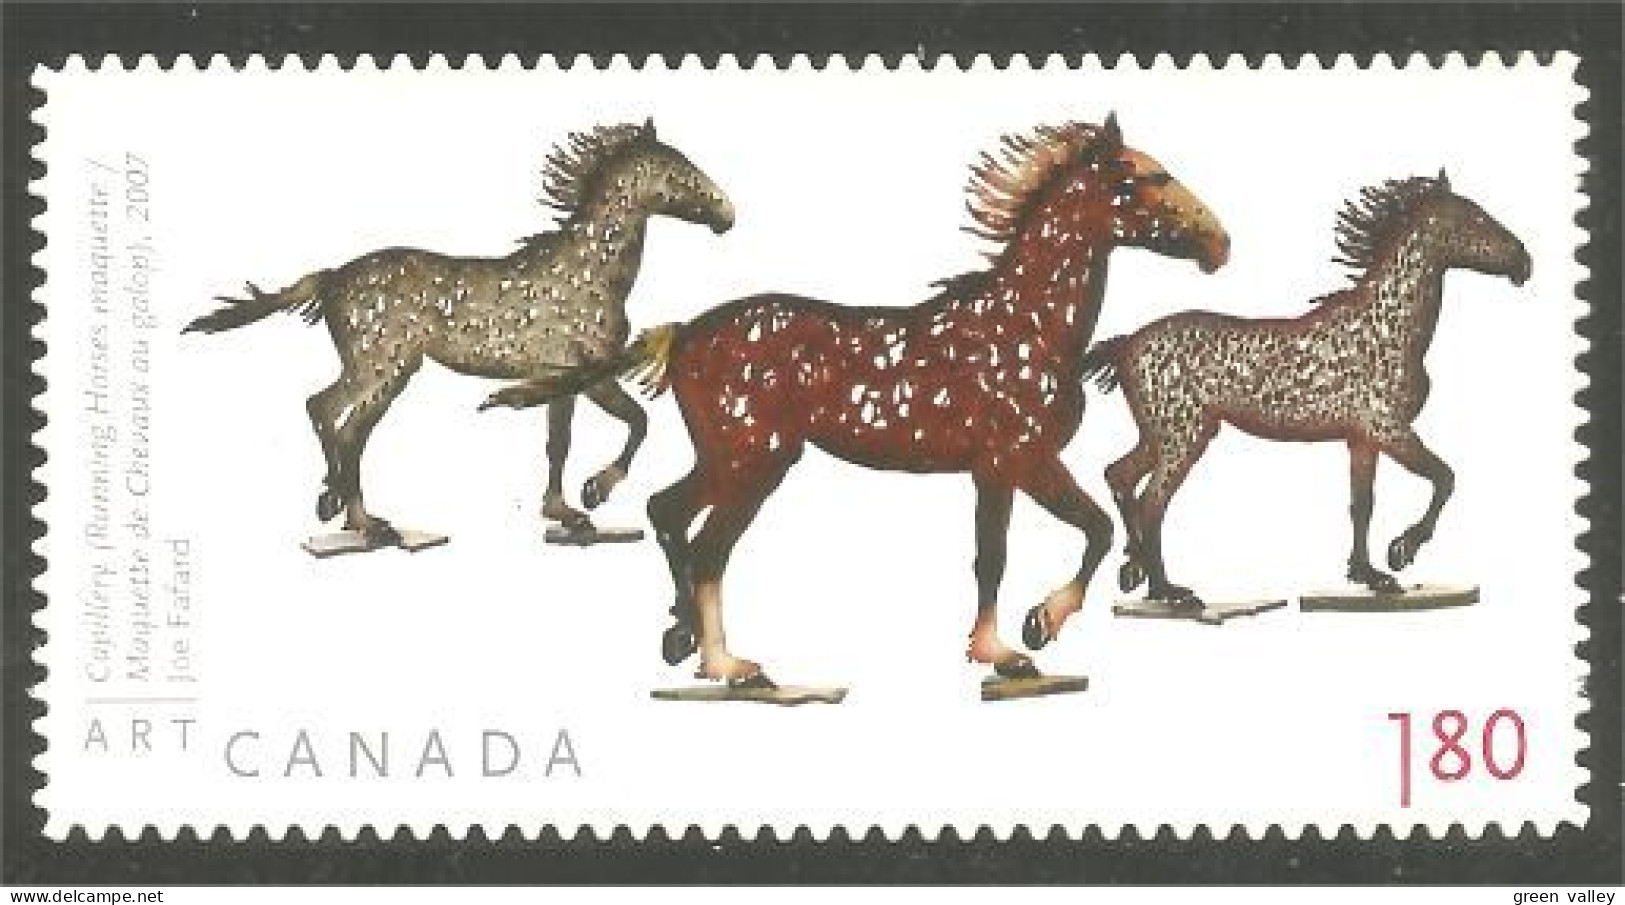 Canada Cheval Chevaux Horses Pferd Cavalle Caballe Annual Collection Annuelle MNH ** Neuf SC (C25-25i) - Pferde